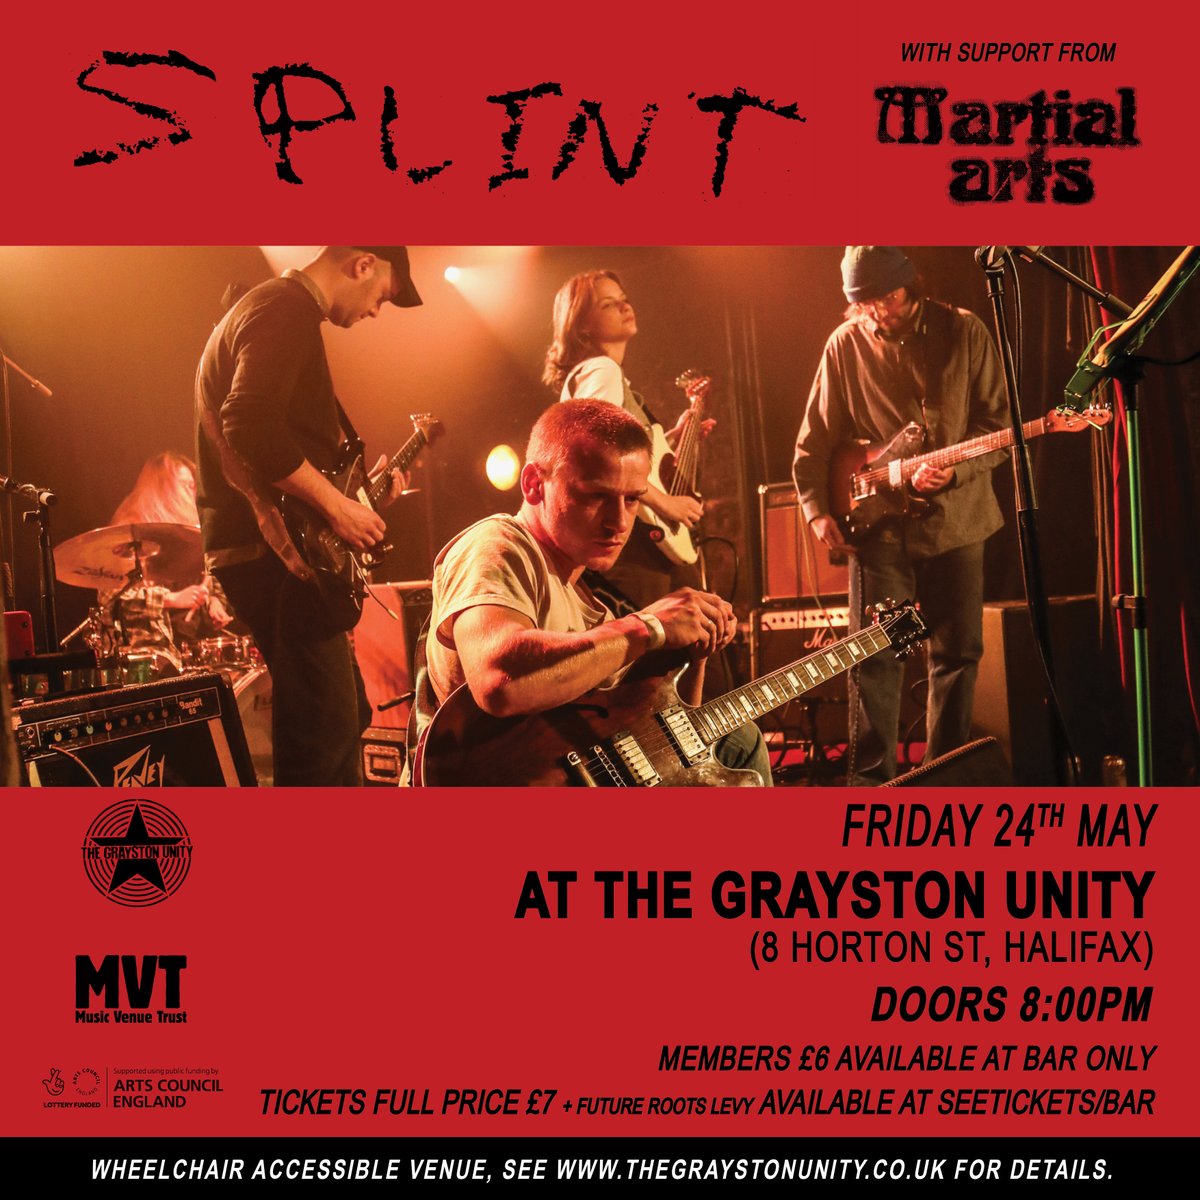 We will be playing grayston unity on the 24th May with the one and only @martialartsband Get ur tickets quick. seetickets.com/event/splint-t…